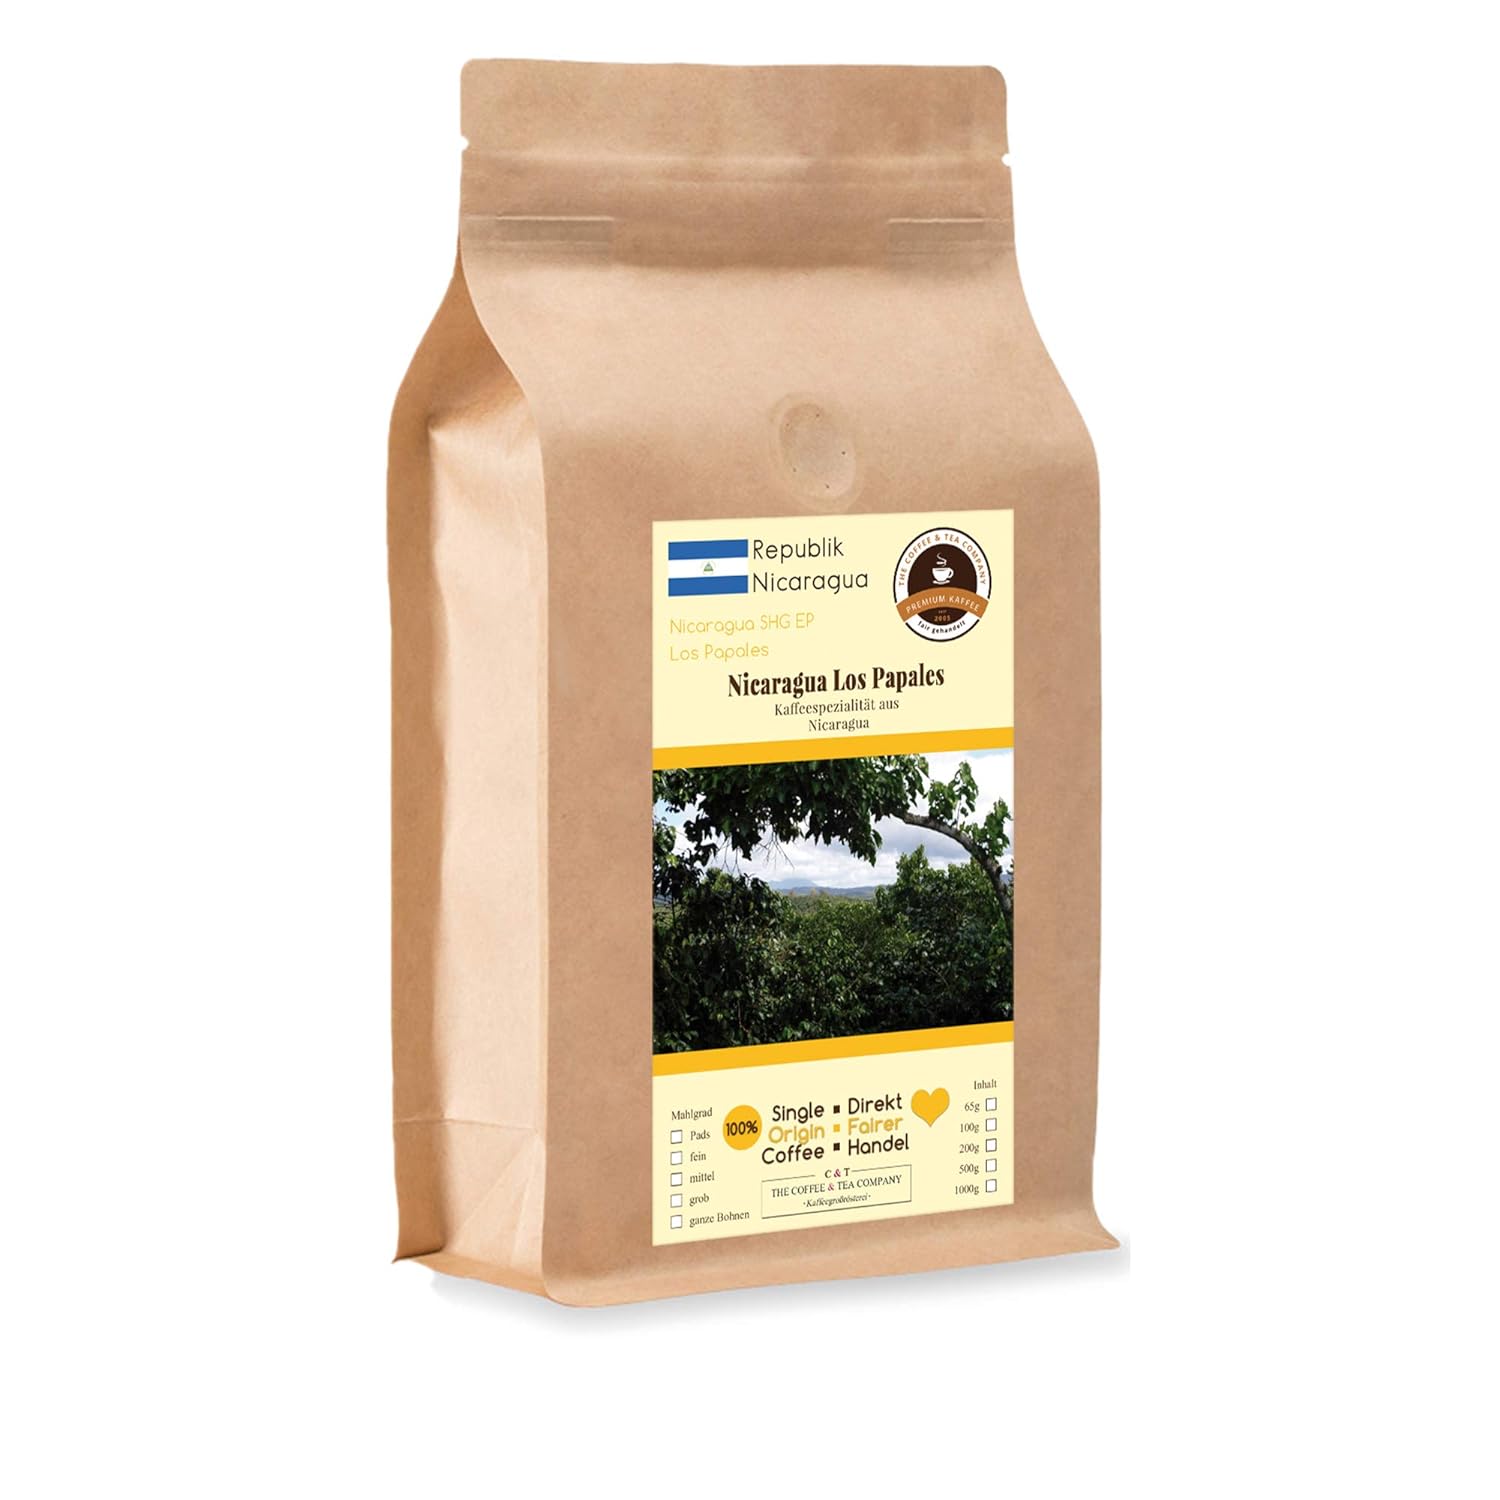 Coffee Globetrotter - Coffee with Heart - Nicaragua Los Papales - 500 g Whole Bean - for Fully Automatic Coffee - Top Coffee Fair Trade Supports Social Projects